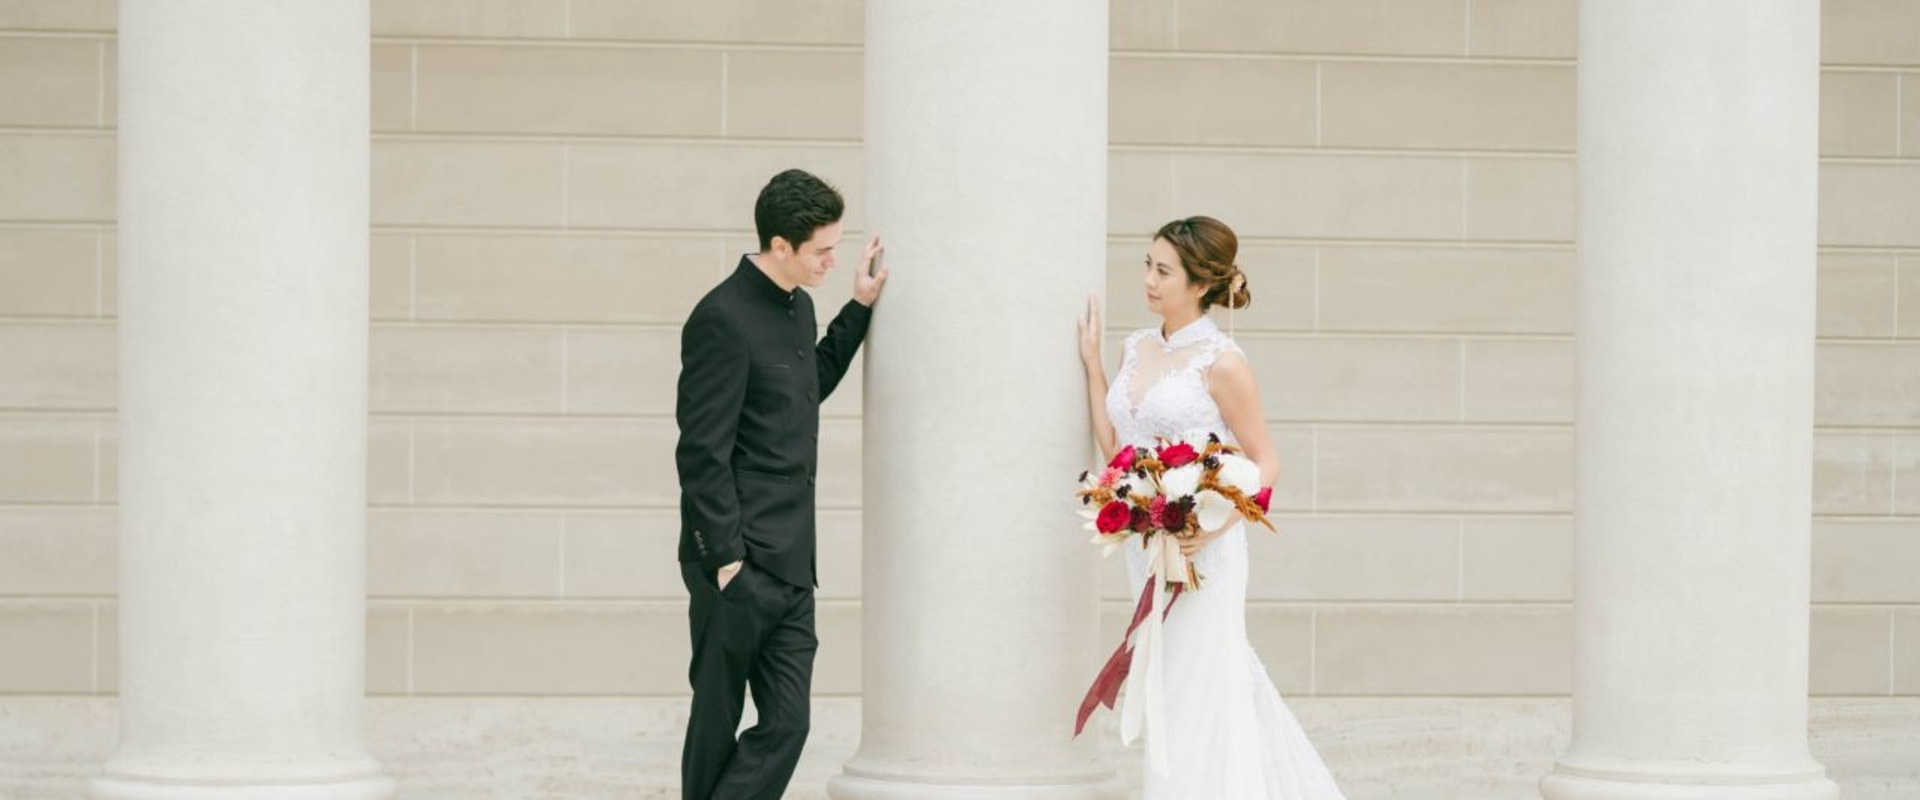 Four Types of Wedding Ceremonies: What to Consider When Choosing